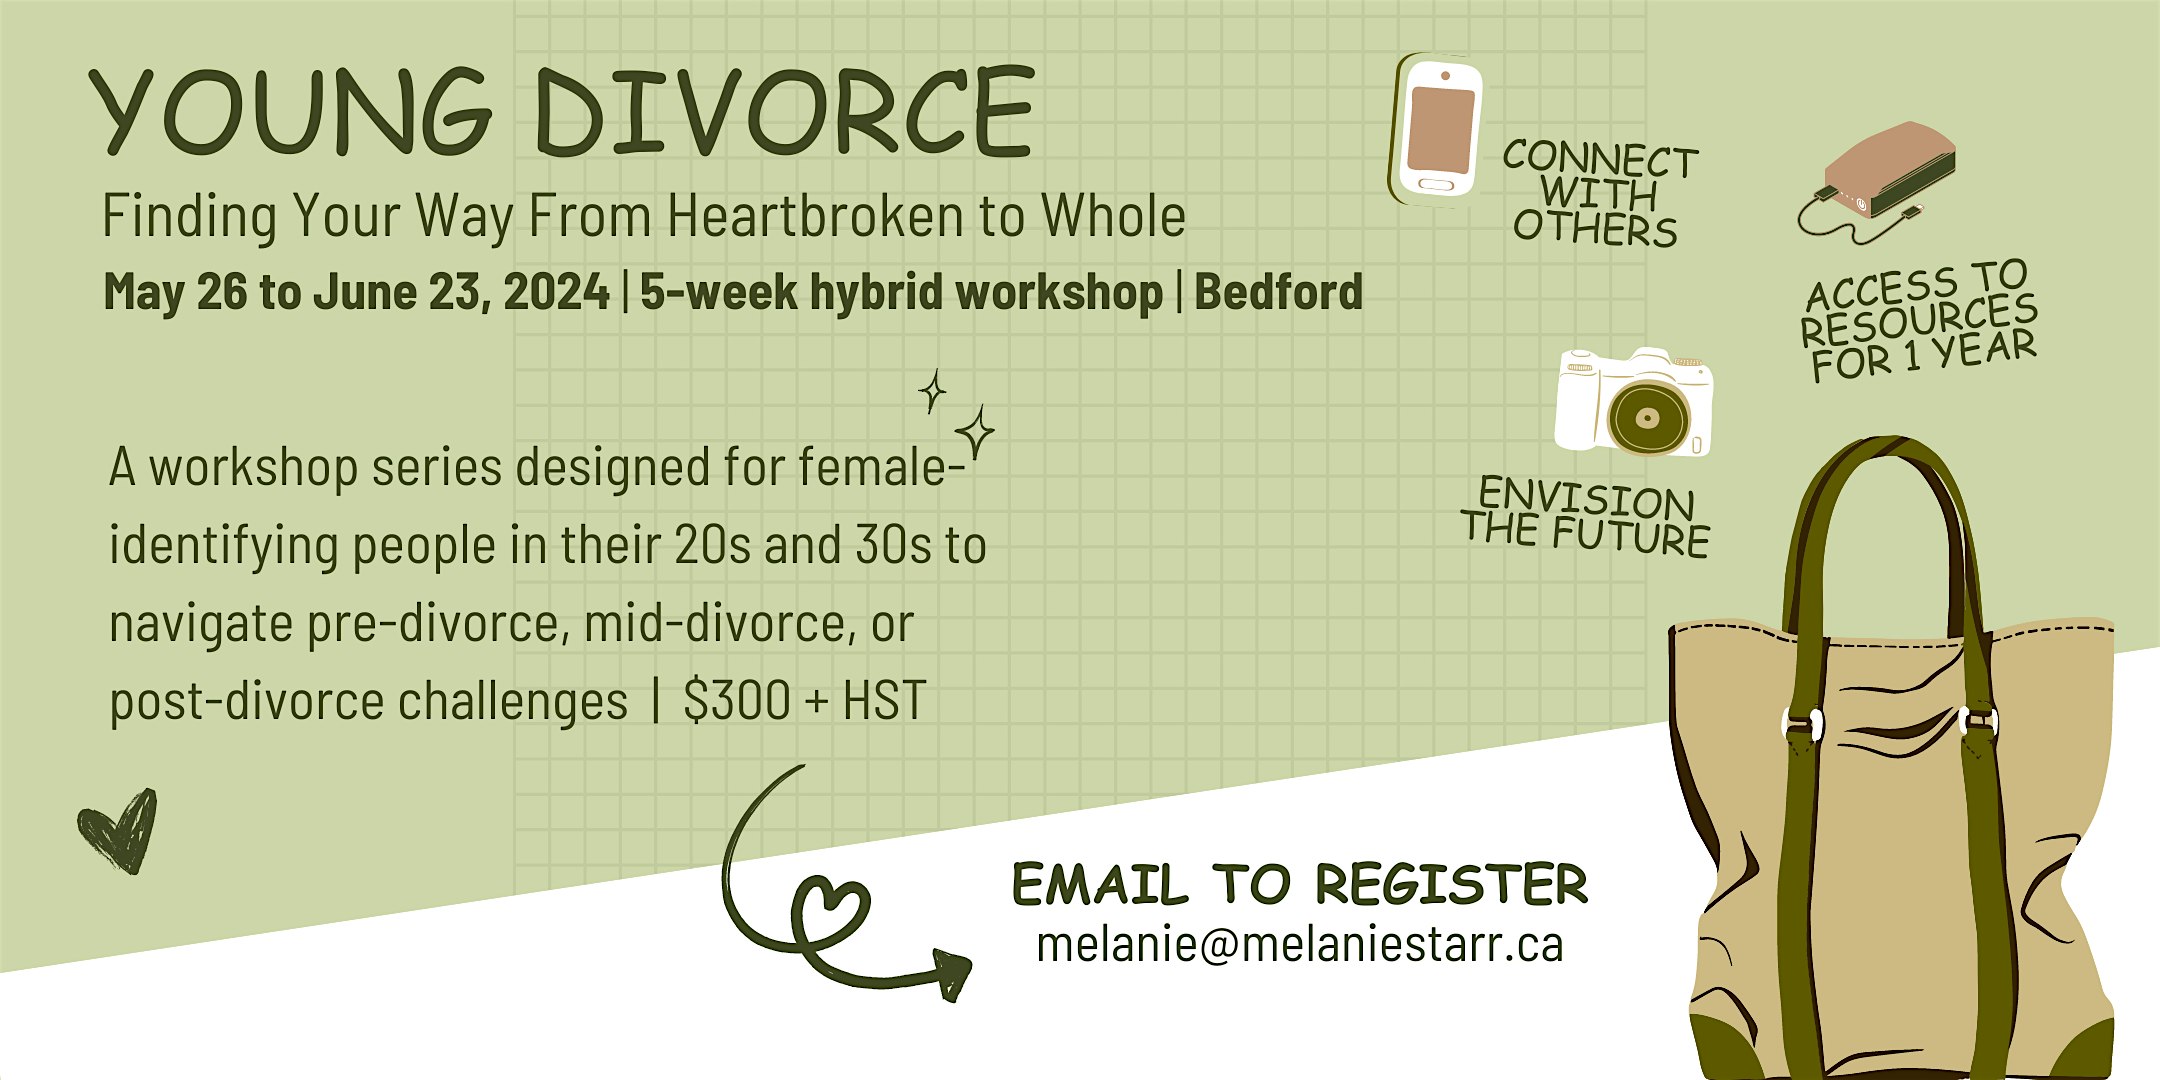 Young Divorce: Finding Your Way from Heartbroken to Whole